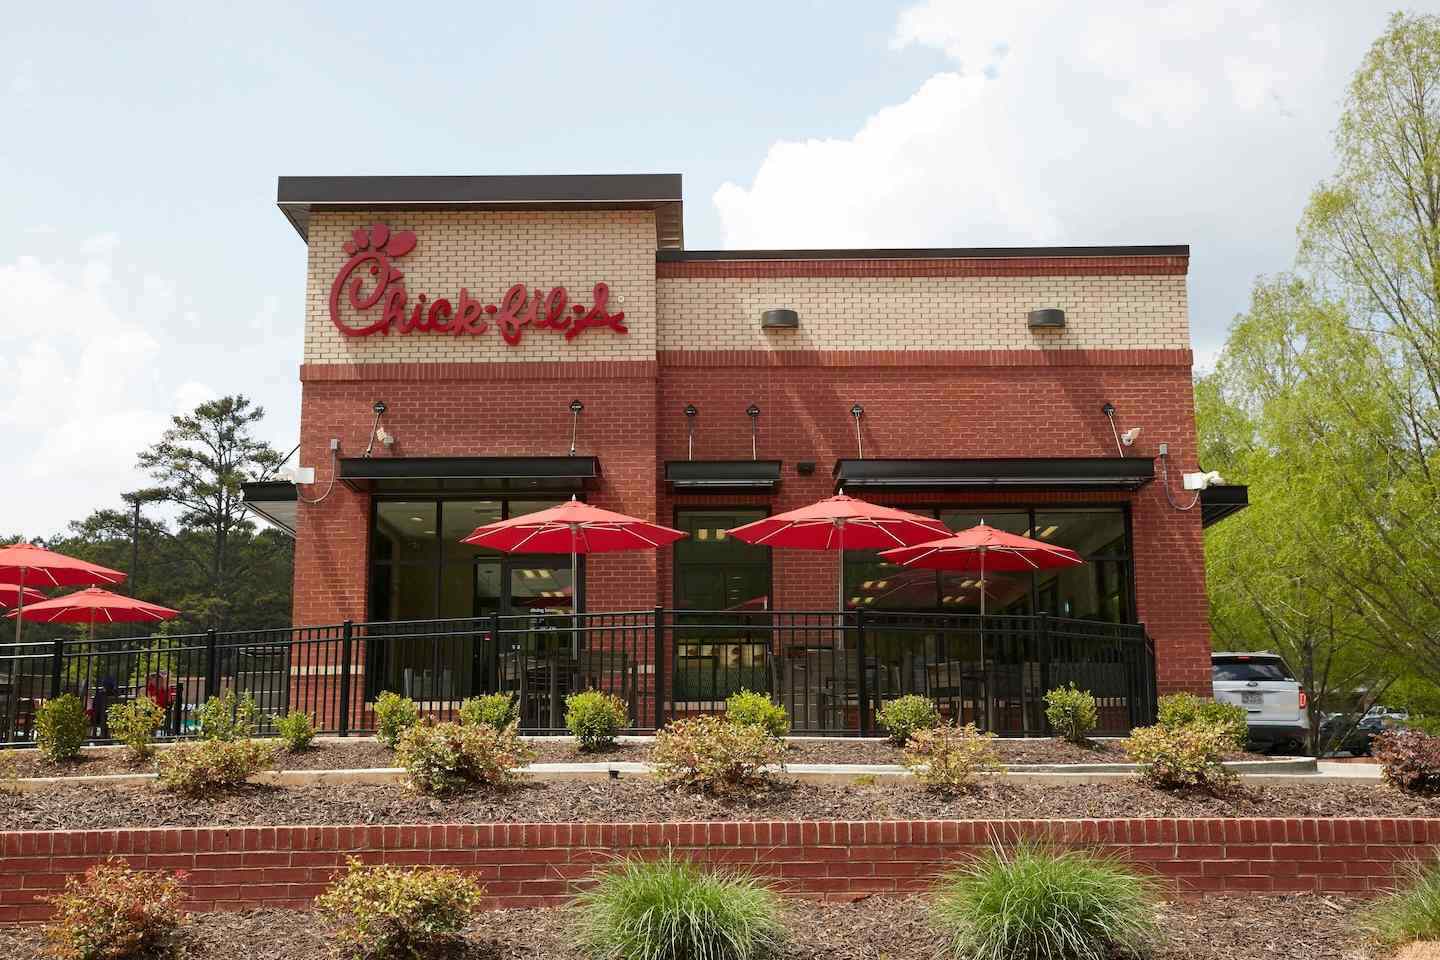 The exterior of a brick Chick-fil-A restaurant with red Chick-fil-A signage. 